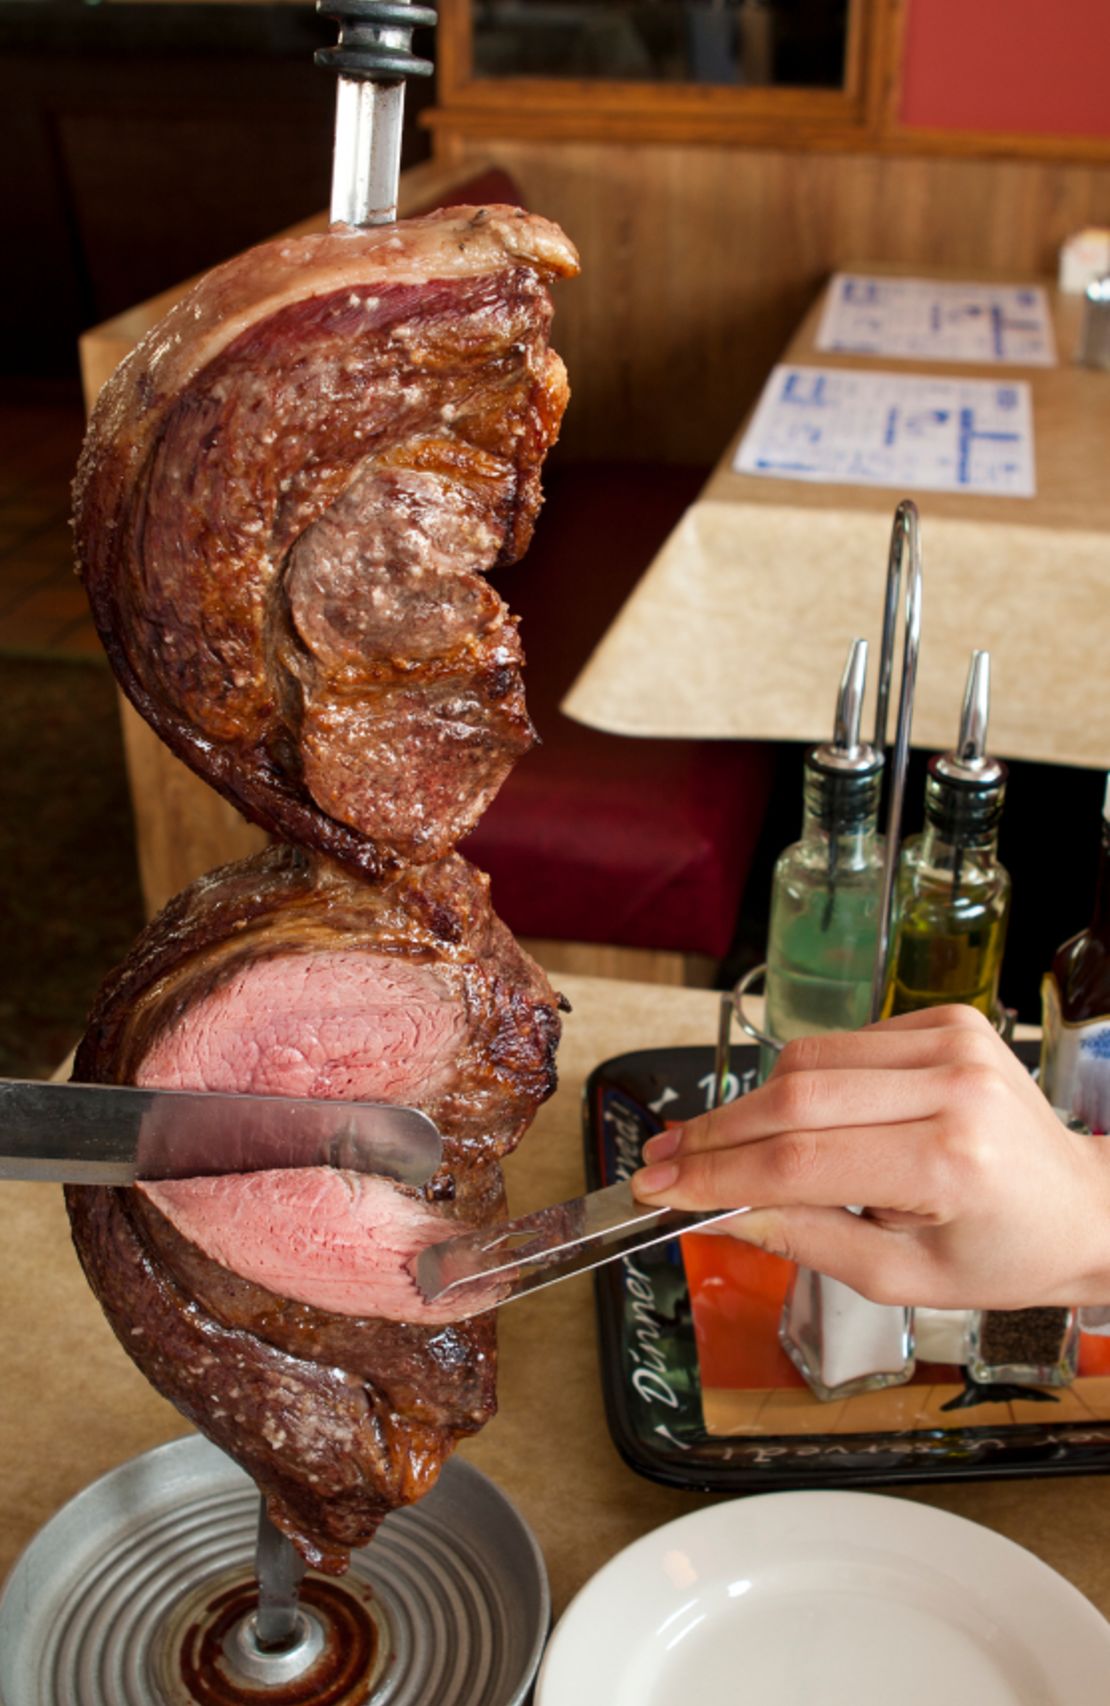 Brazilian barbecue is fueled by  a fanatical devotion to high-quality meat and special cuts.